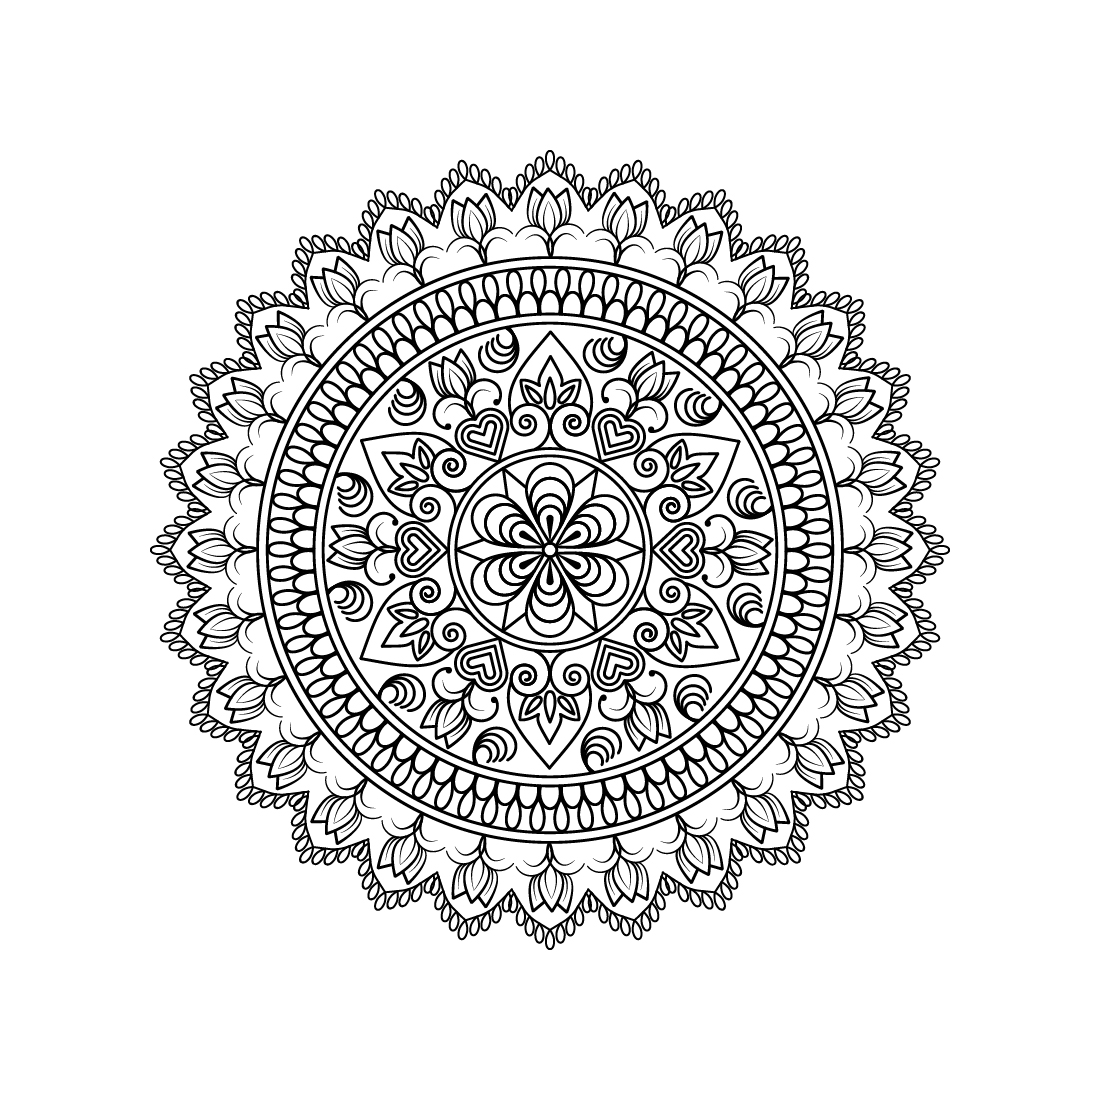 Bundle of 10 Relaxation and Meditation Mandala Coloring Book Pages preview image.